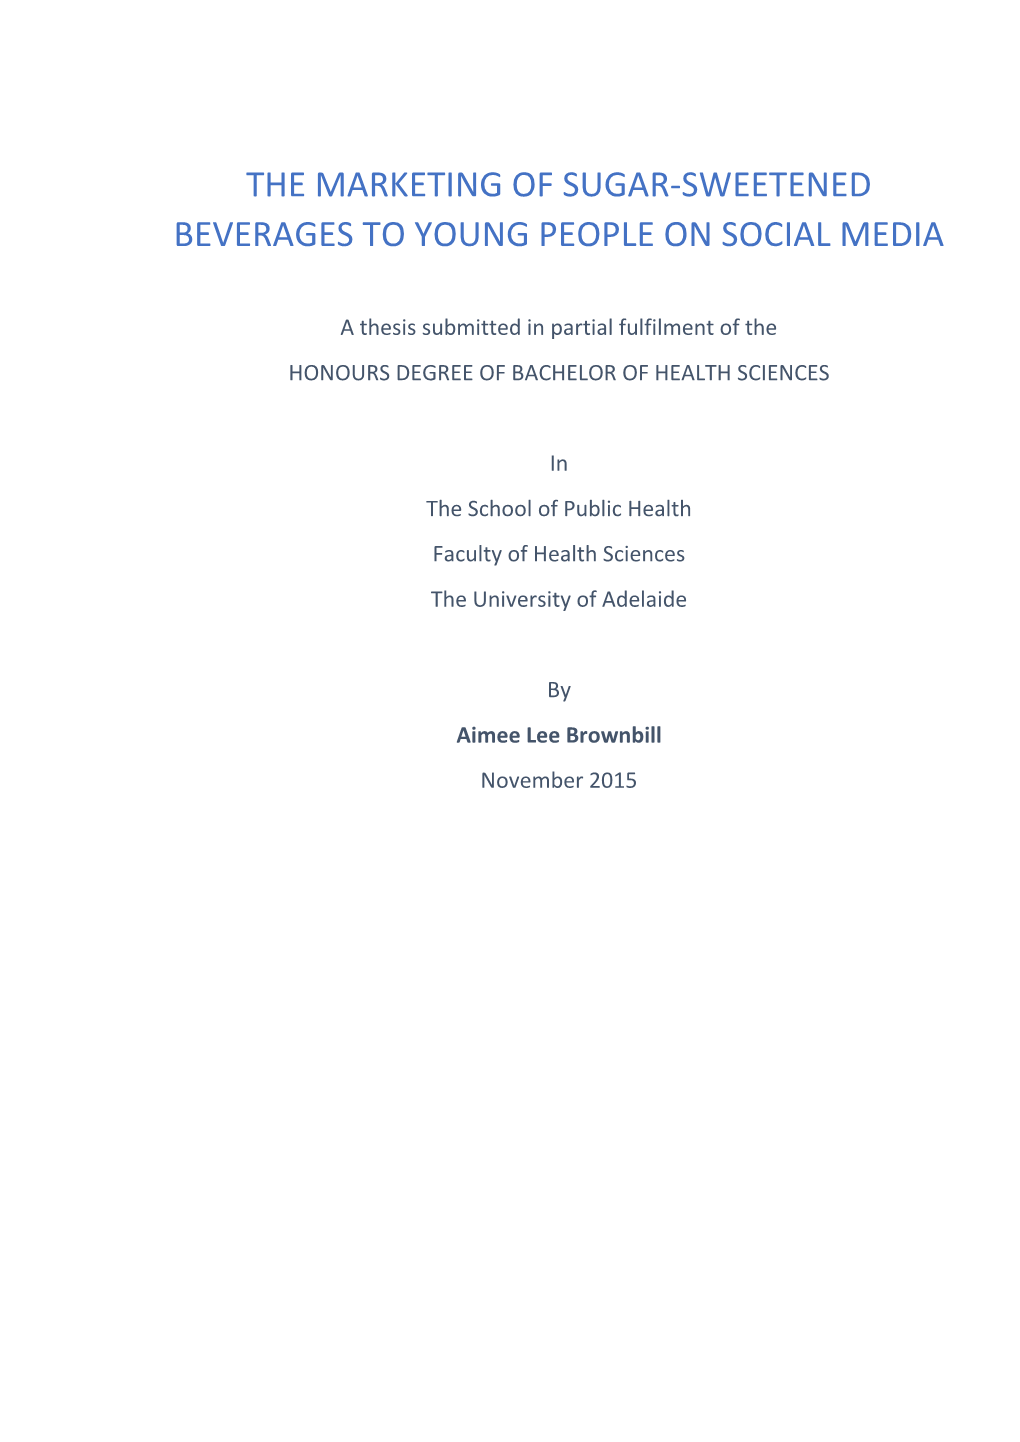 The Marketing of Sugar-Sweetened Beverages to Young People on Social Media